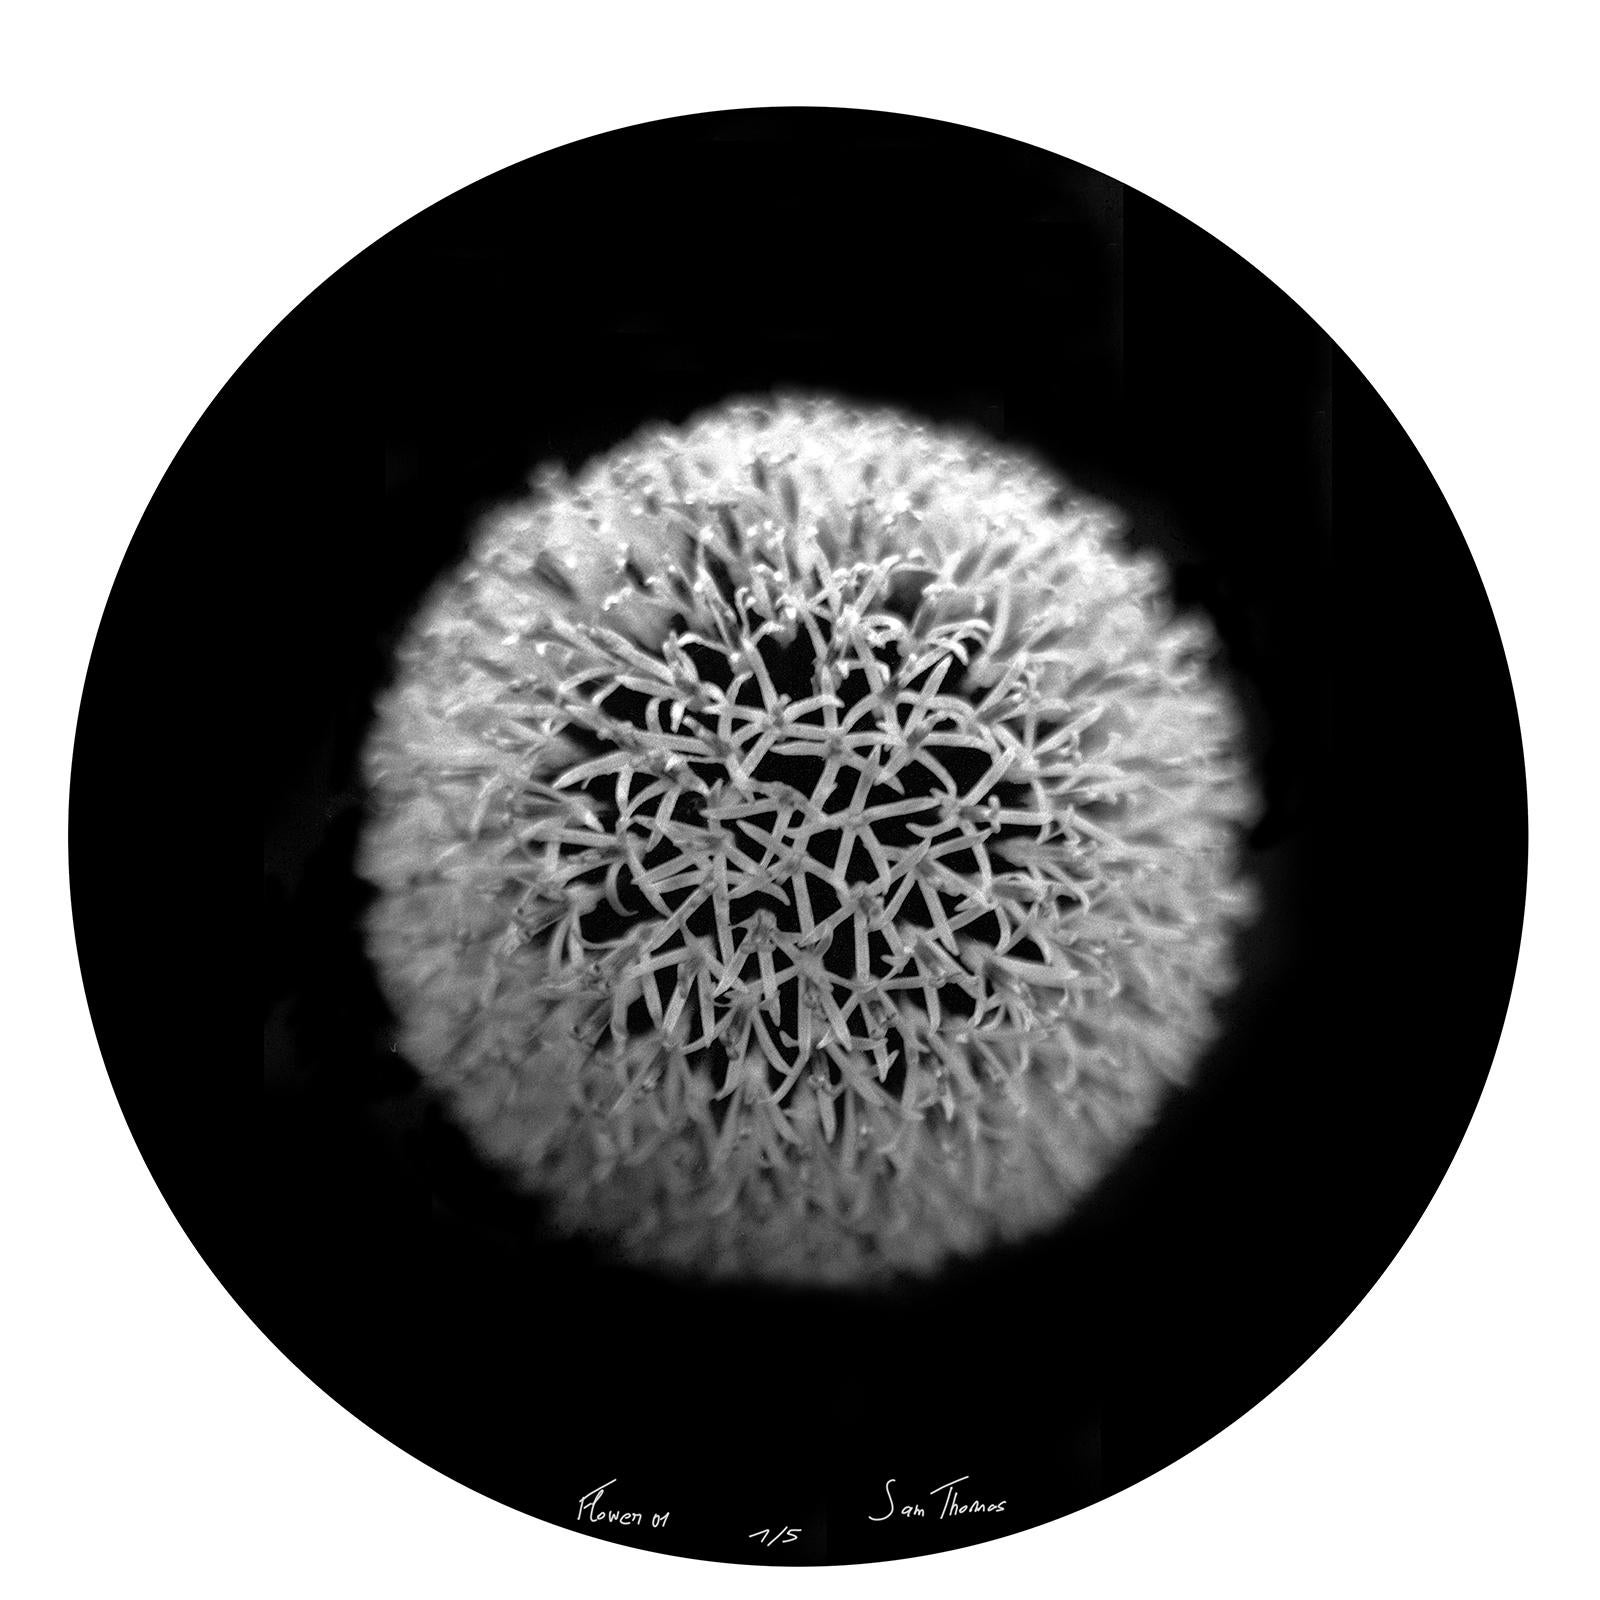 Flower 1- Limited edition pigment print  -   Limited Editions of 15
Close-up on a round flower on an round background, unframed.

Signed + numbered by artist with certificate of authenticity. 
Free delivery

Archival pigment print available sizes (